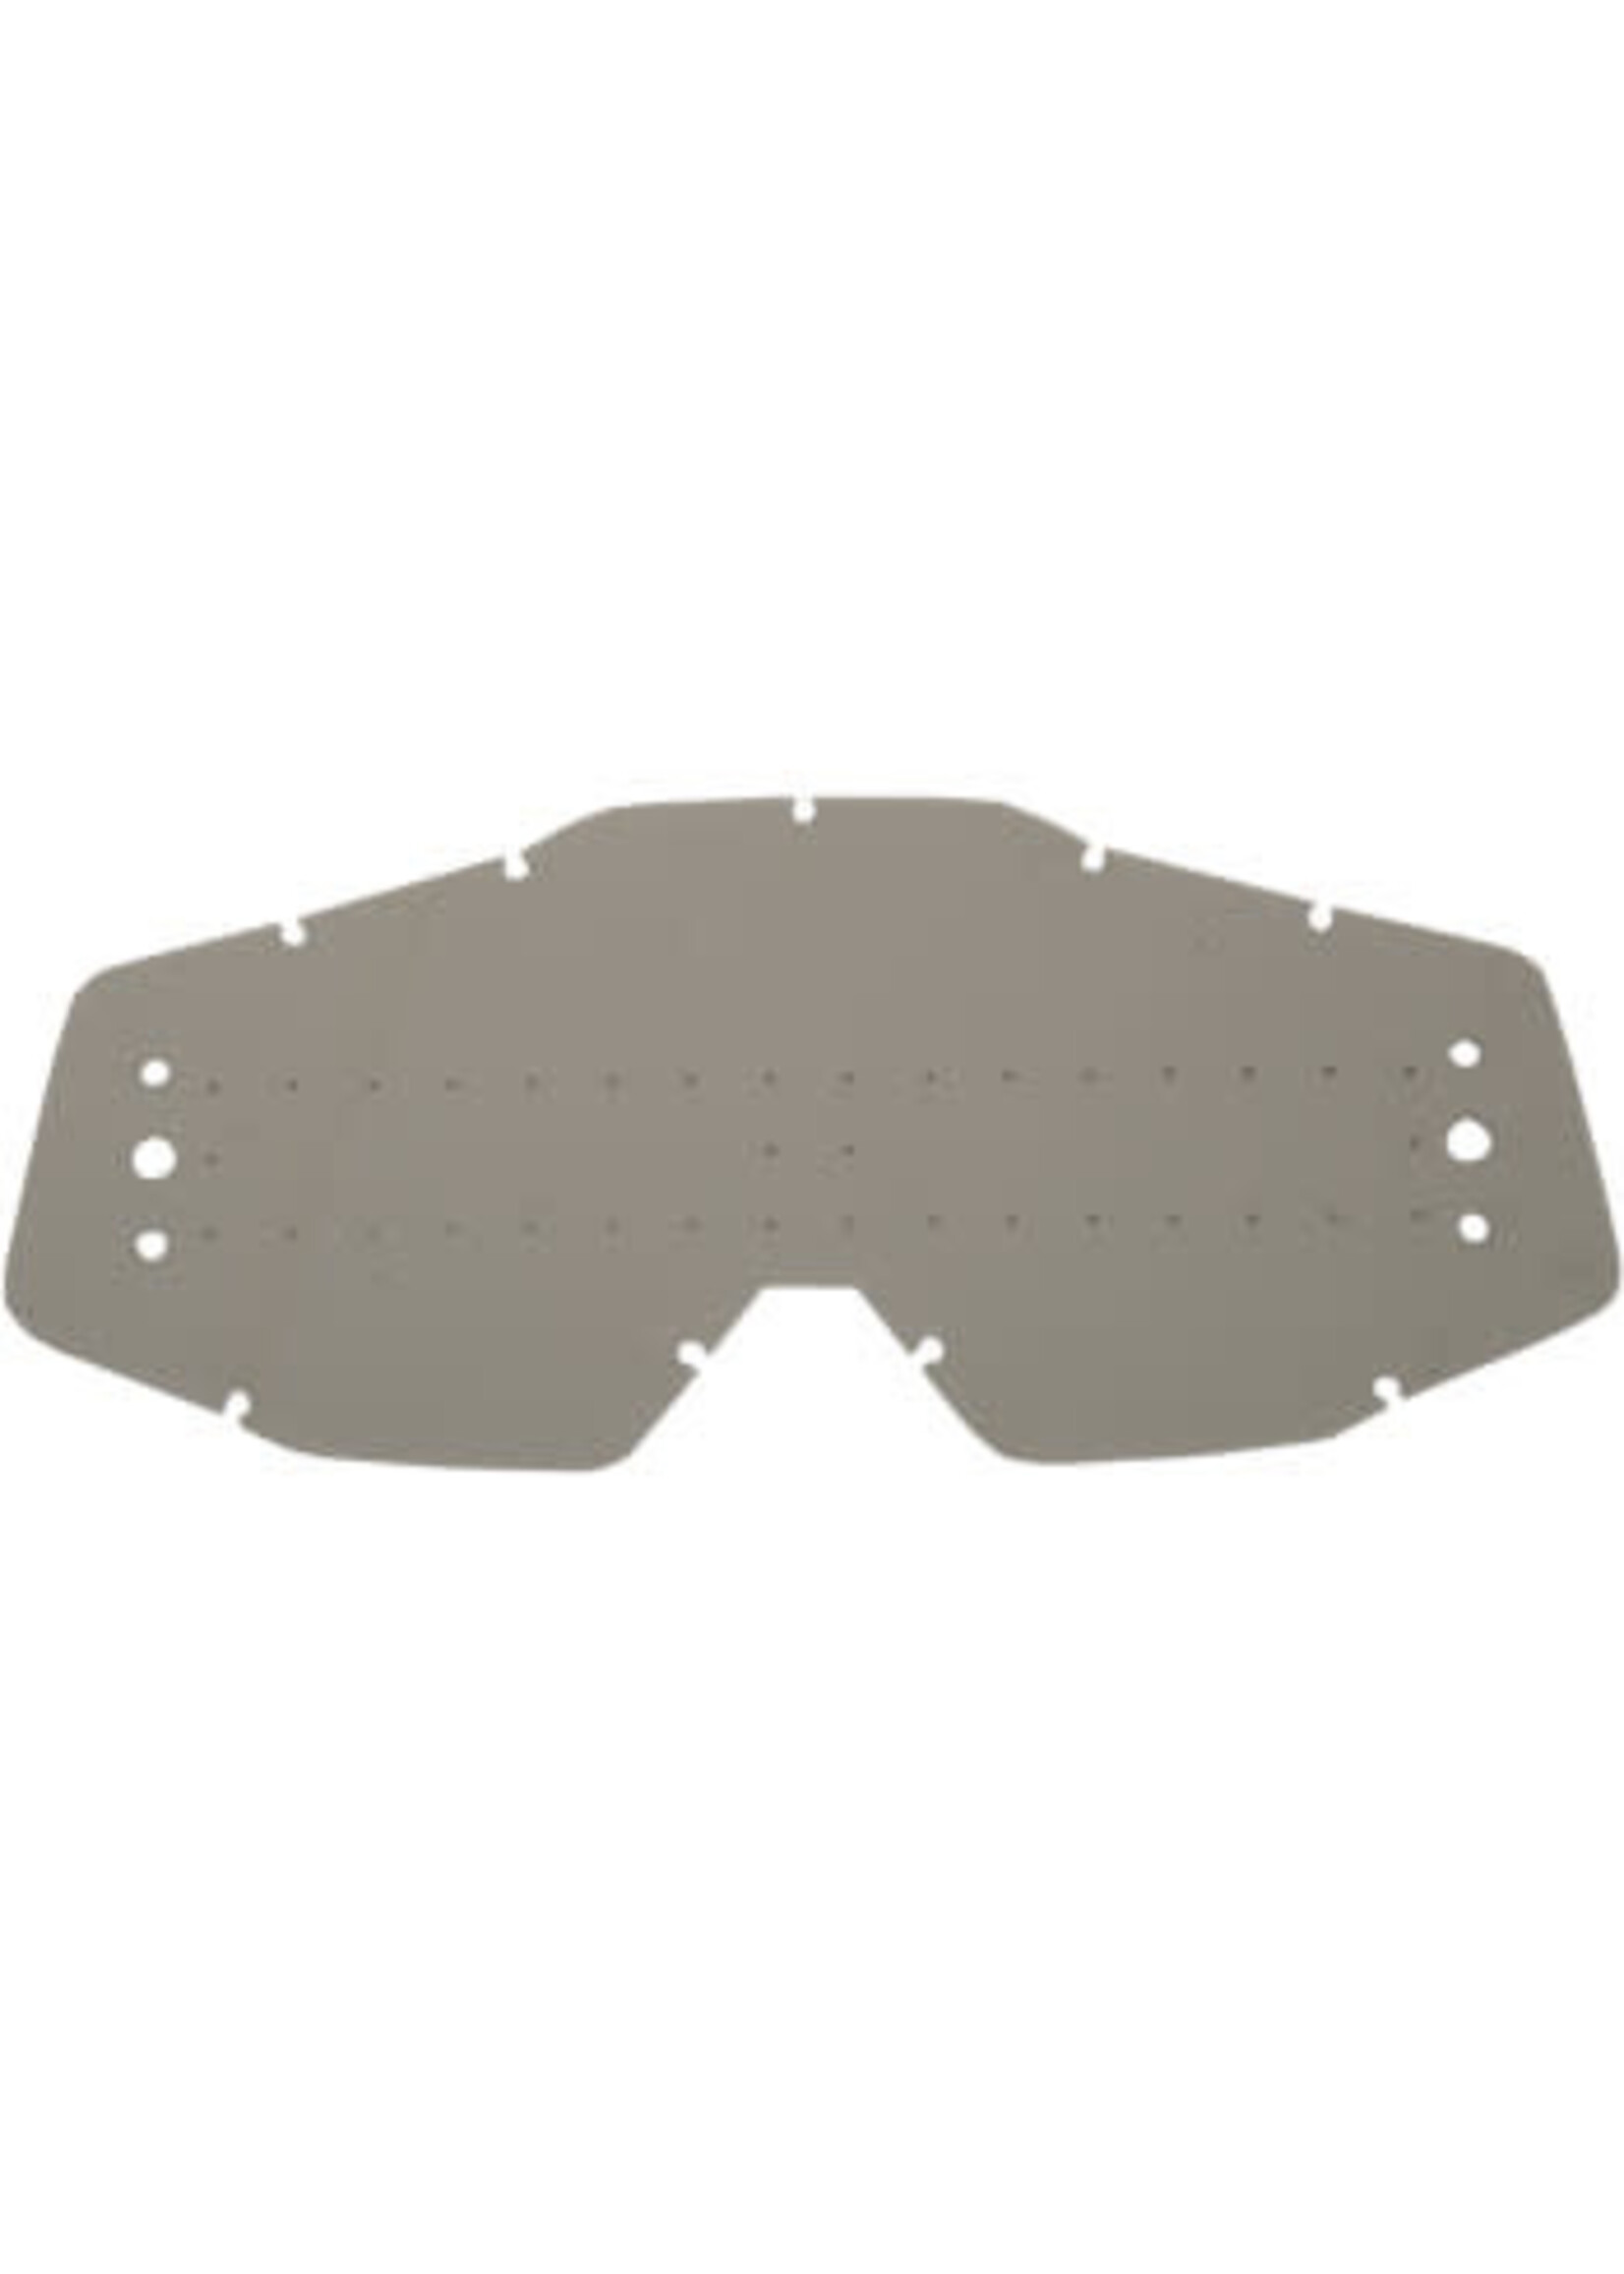 100% Speedlab Vision System Goggle Lens — With Holes